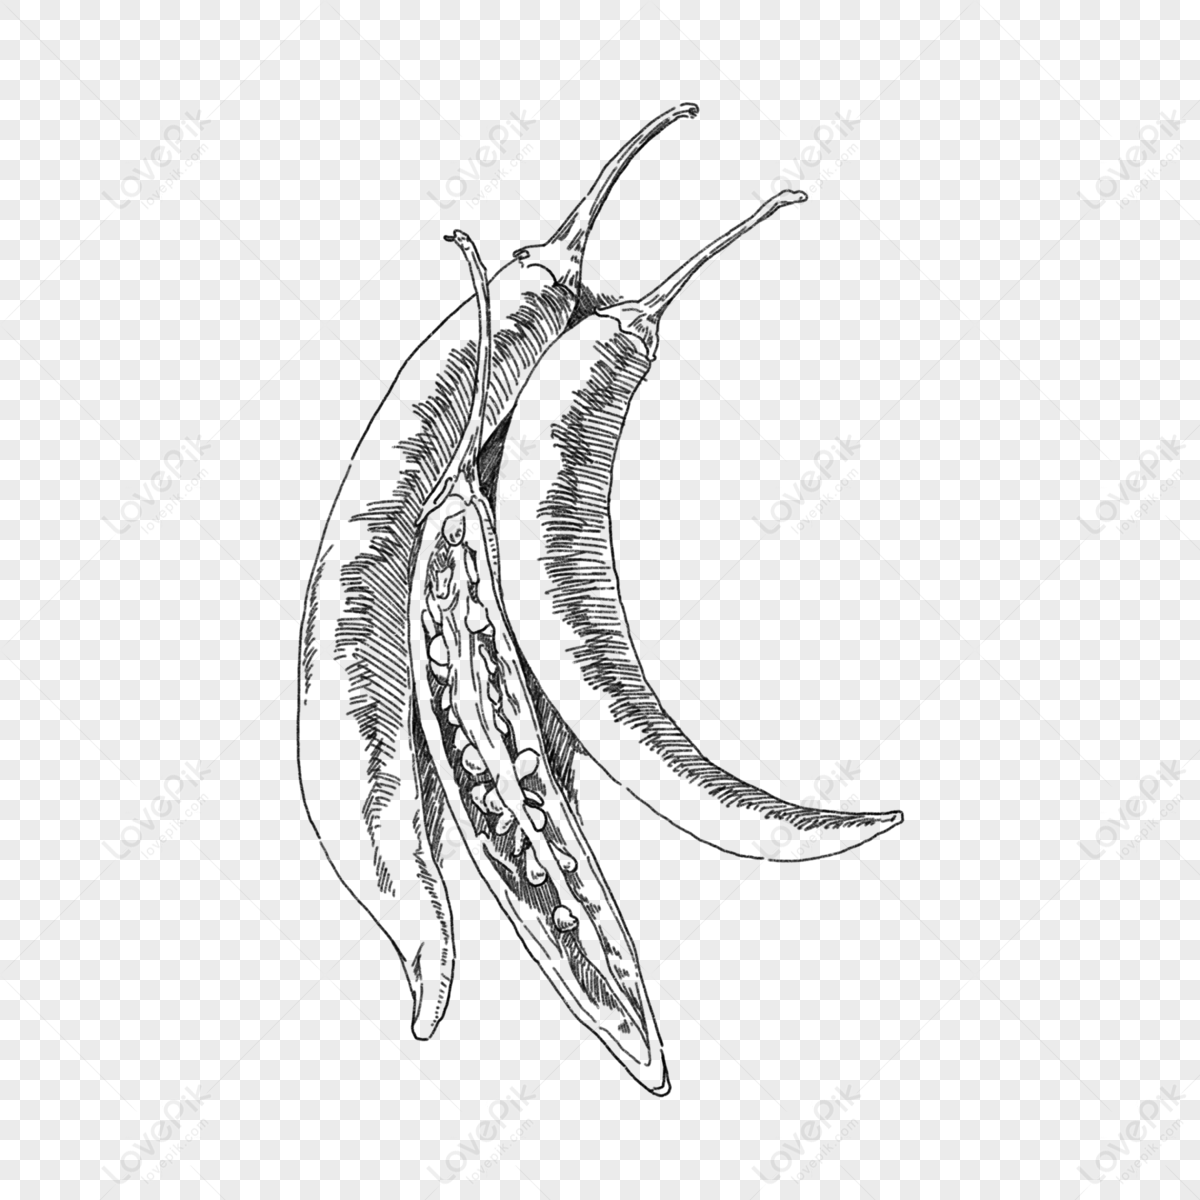 Black Pepper Seeds Isolated Peppercorn Seasoning. Vector All Spices Pepper  Condiment Grains. Dried Spice, Allspice Peppery Culinary Flavoring, Whole  Grains Hand Drawn Sketch, Aromatic Pimento Royalty Free SVG, Cliparts,  Vectors, and Stock